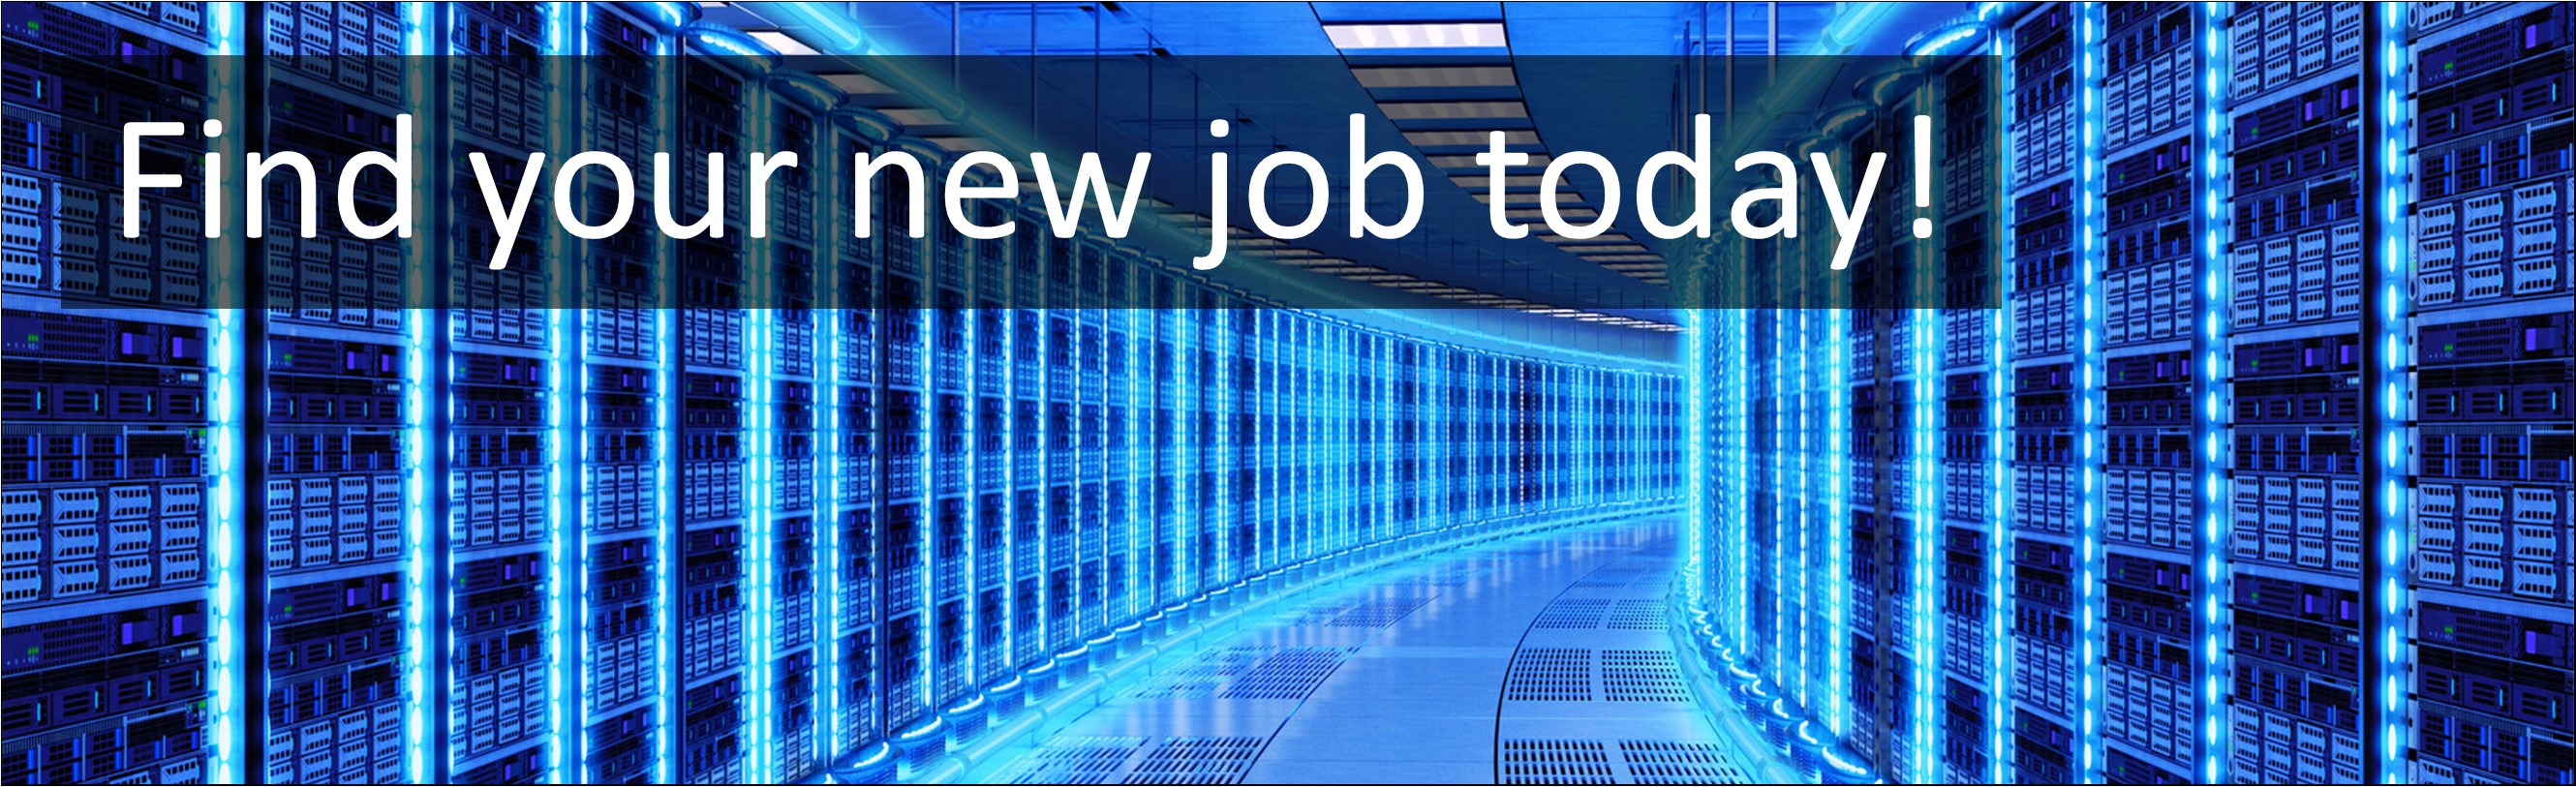 IT & Communication Jobs. Lead Open Source Technical Consultant Jobs, Careers & Vacancies in Sandwich, Kent Advertised by AWD online – Multi-Job Board Advertising and CV Sourcing Recruitment Services